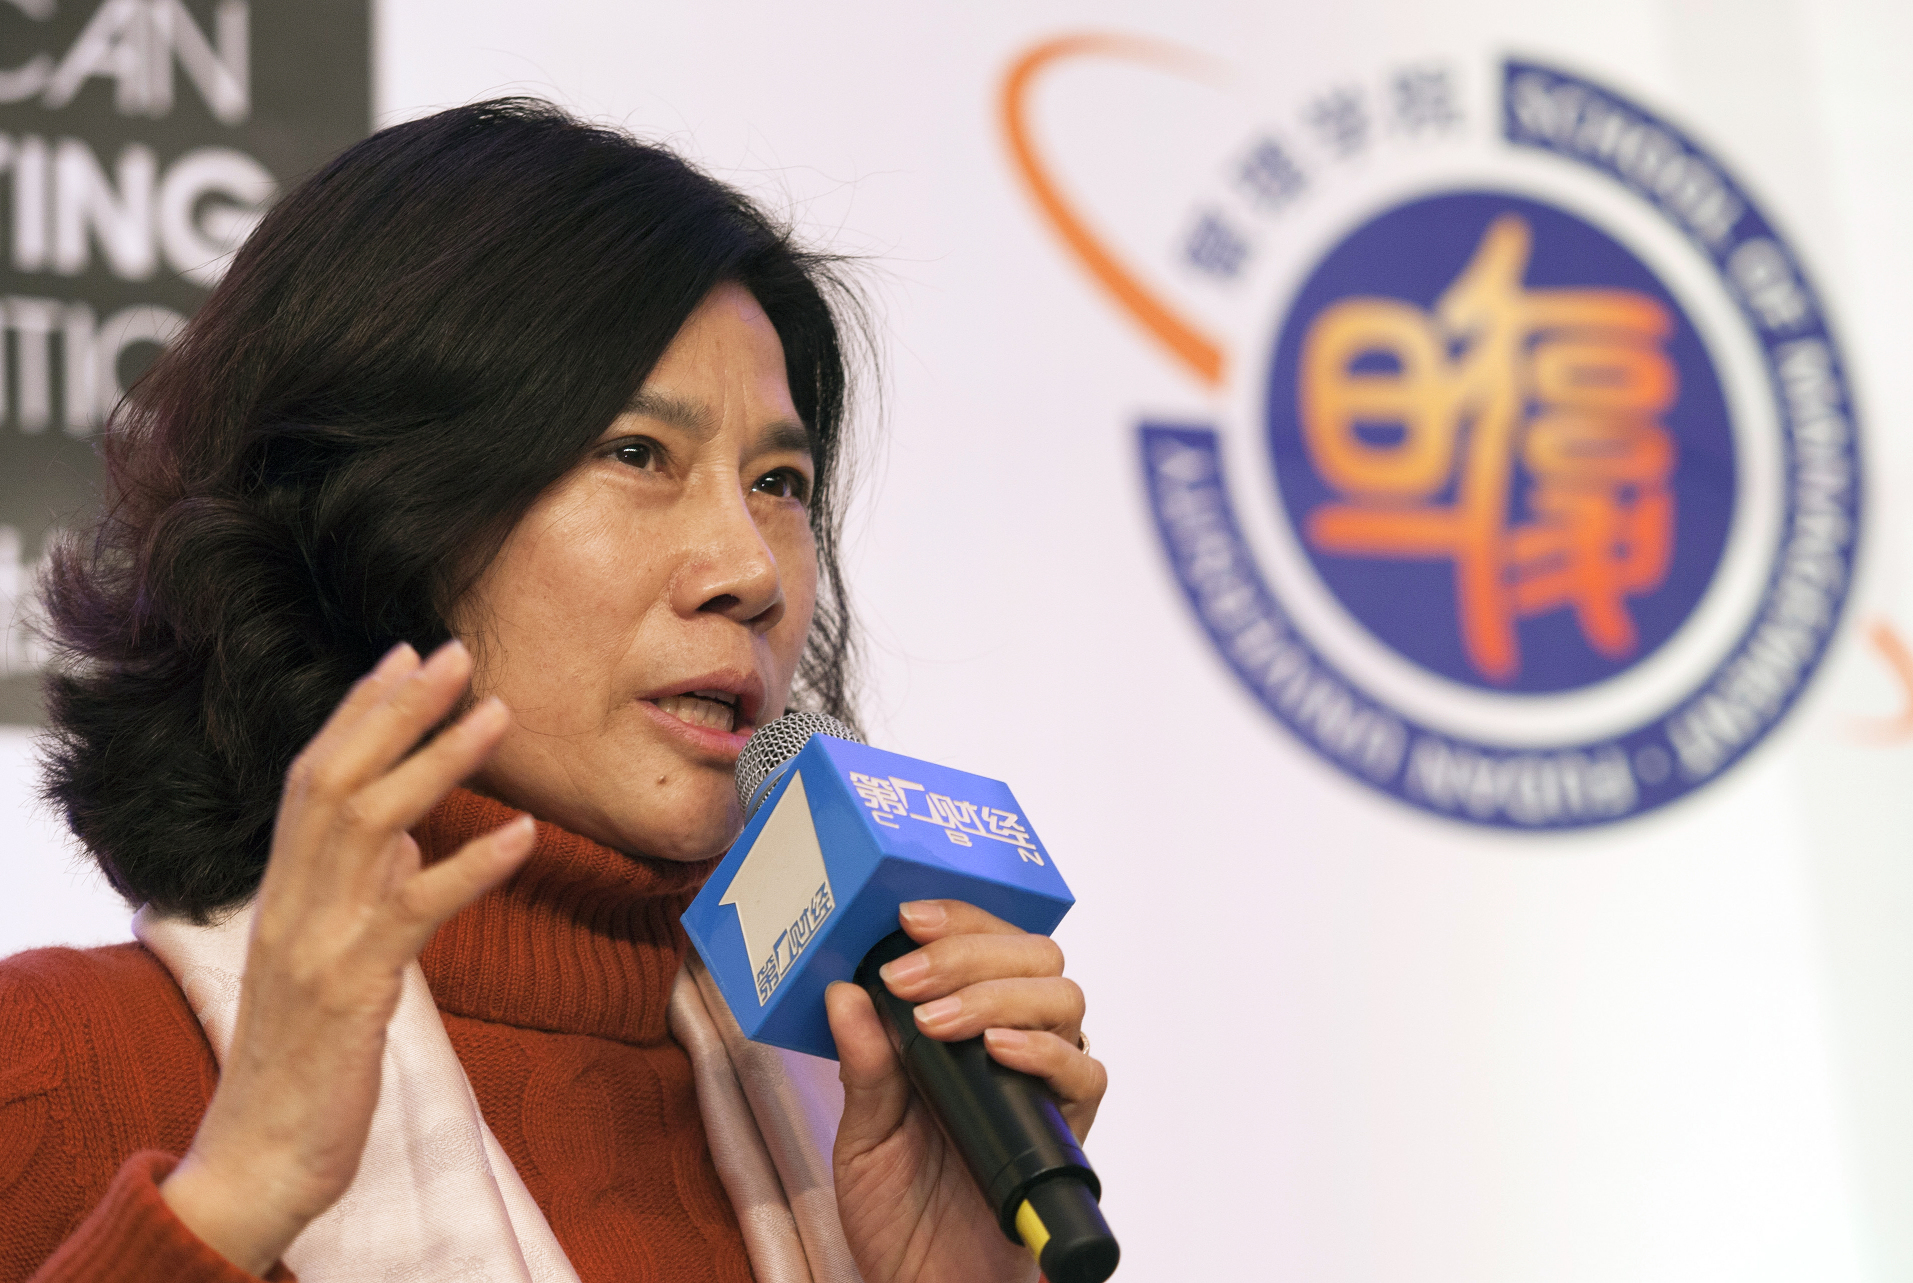 Dong Mingzhu, chairwoman of Gree Electric Appliances. Photo: Handout